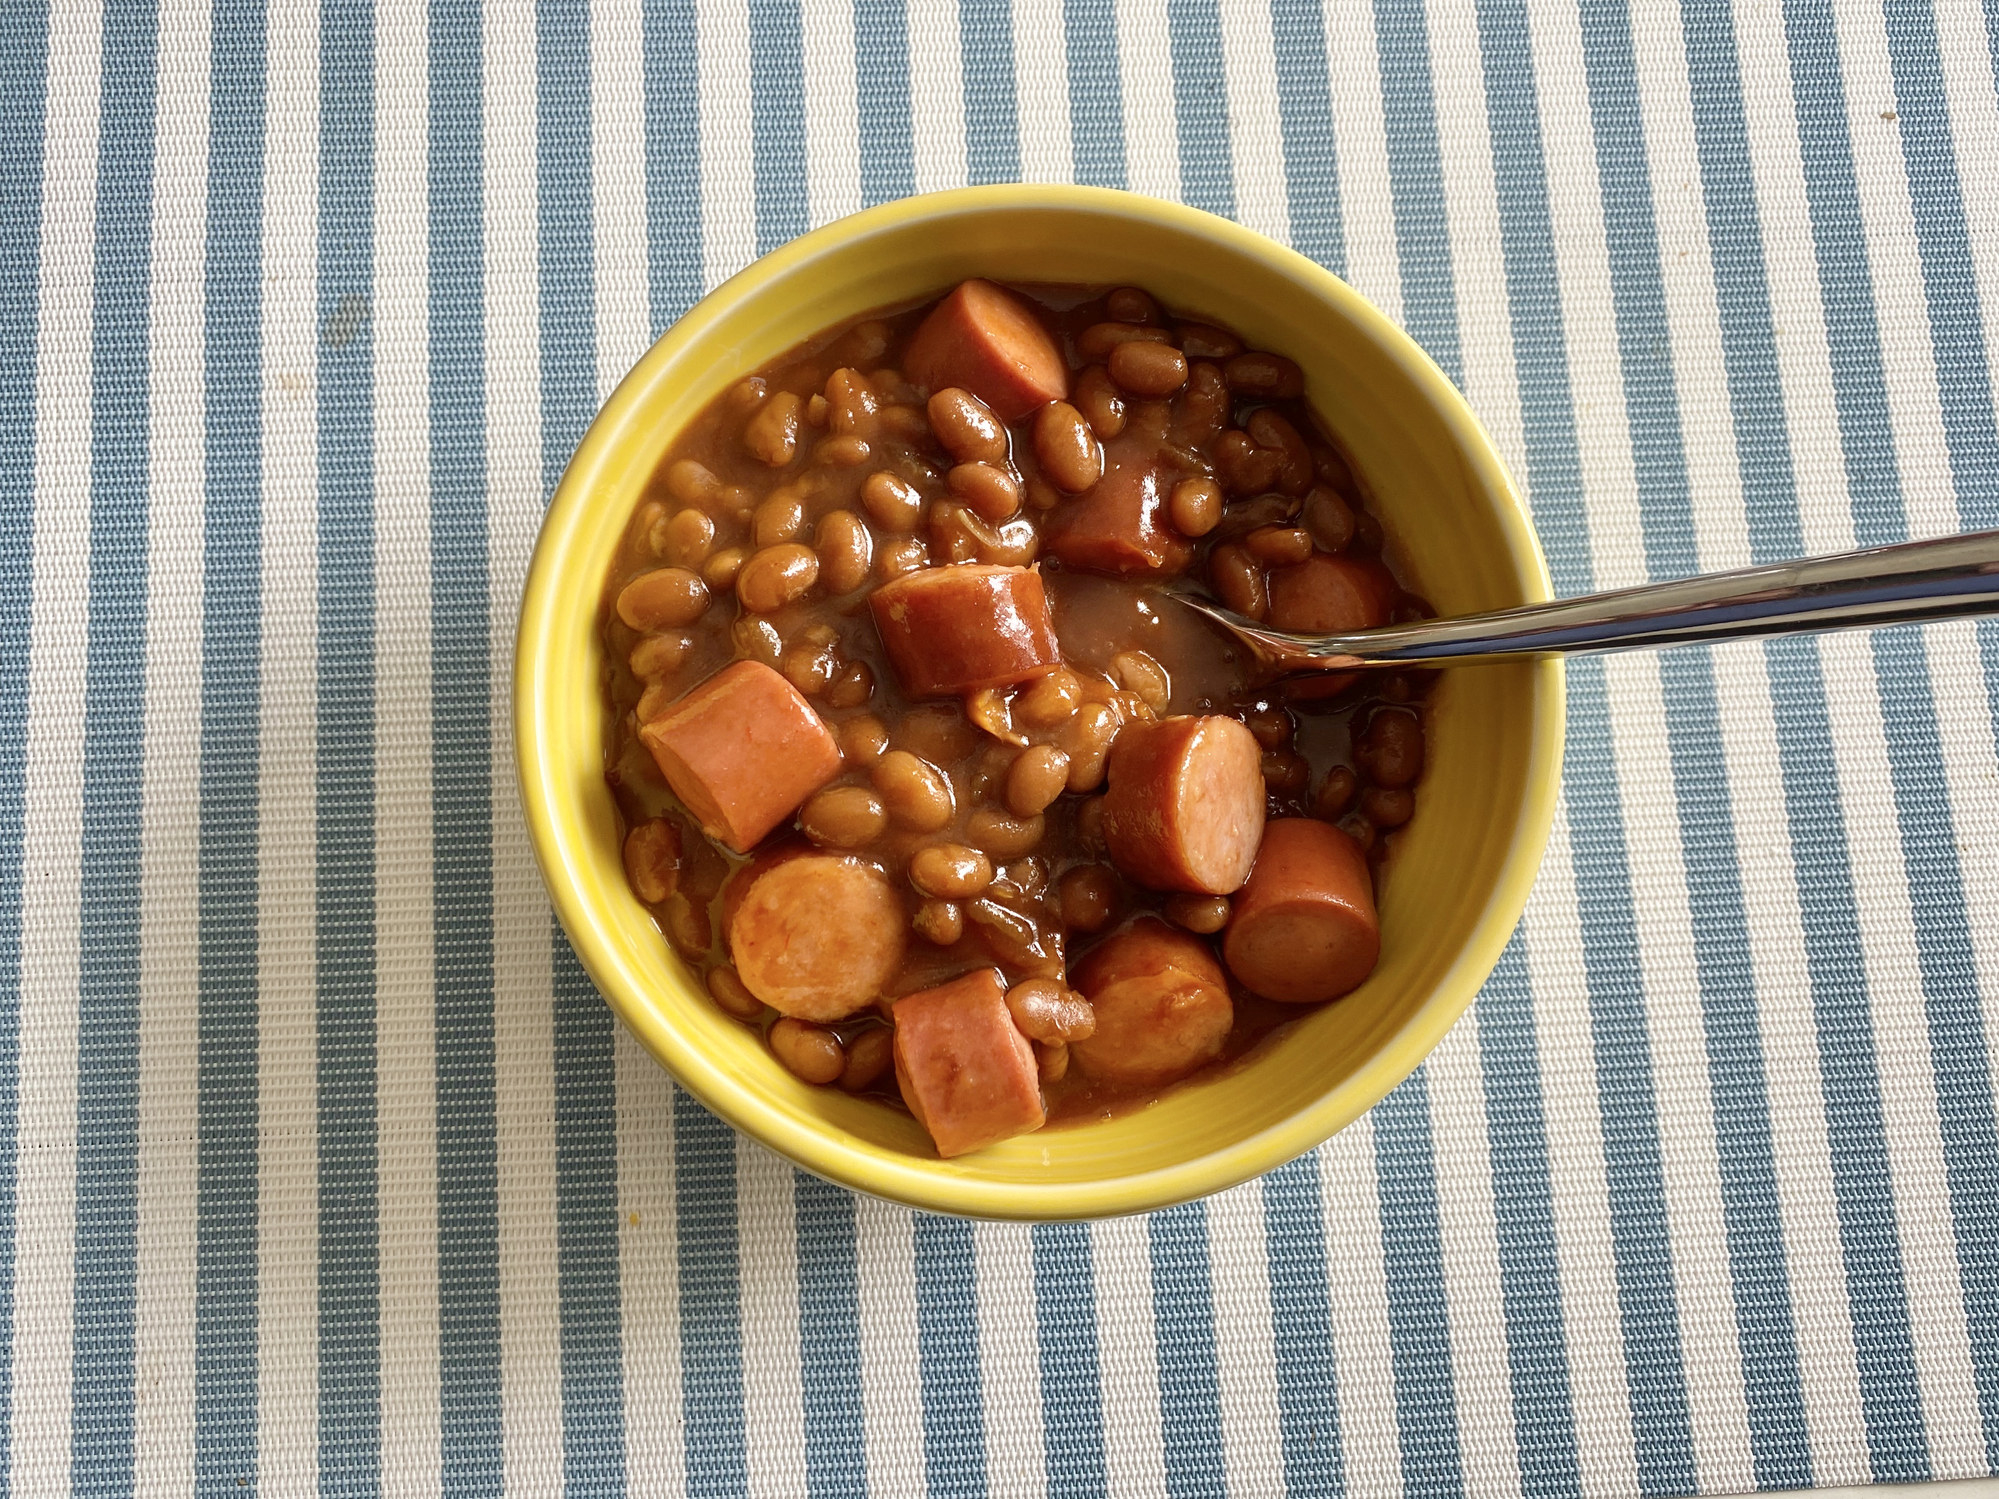 A bowl of baked beans with sliced hot dogs